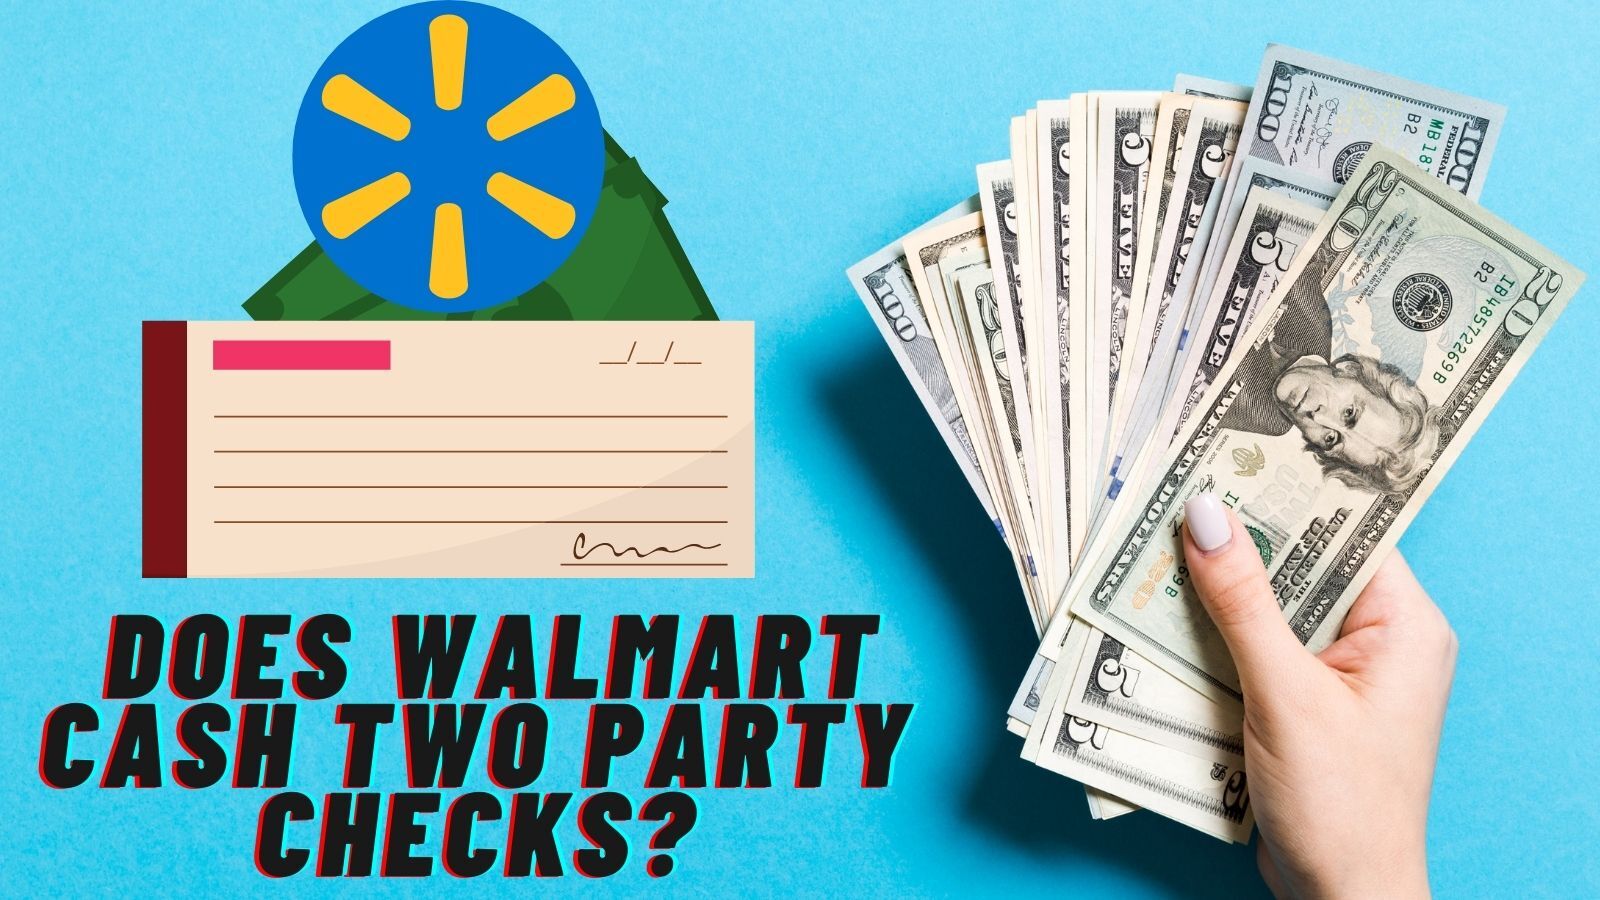  Does Walmart Cash Two Party Checks? (All You Need to Know)